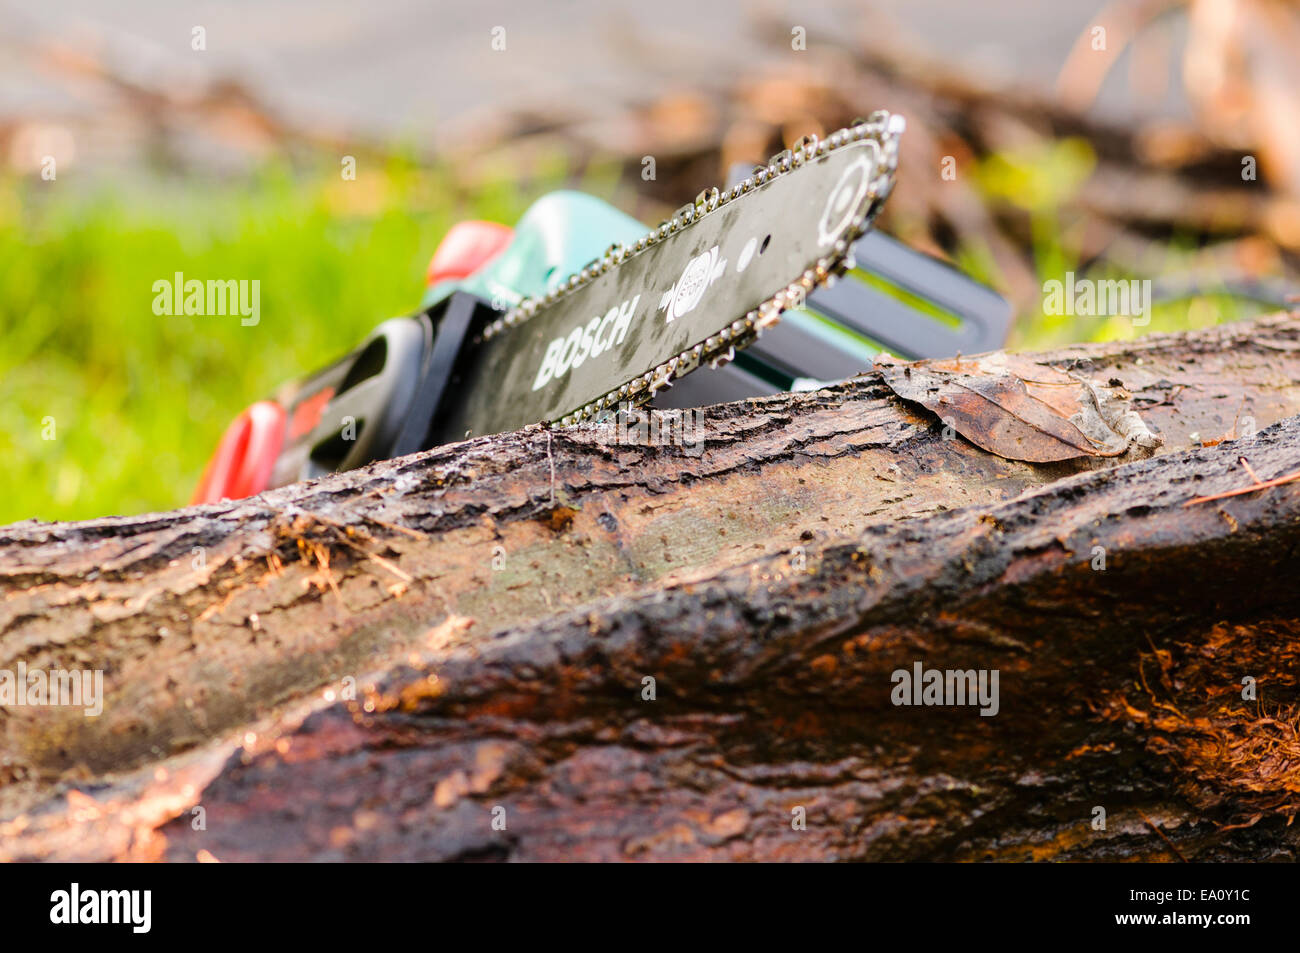 Bosch chainsaw resting on a log Stock Photo